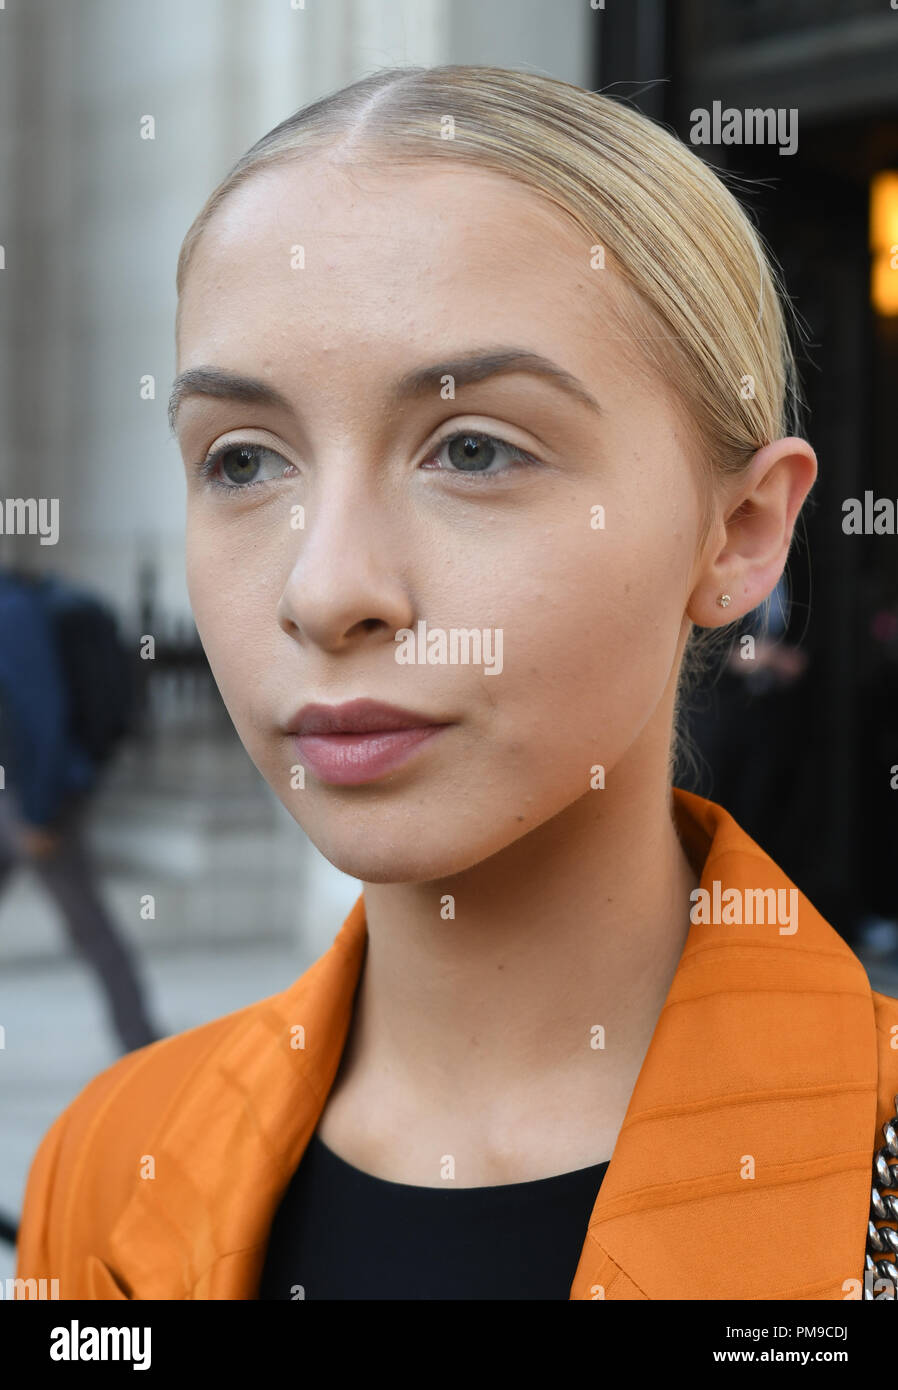 London, UK. 16th Sep 2018. Fashionista attend Fashion Scout - SS19 - London Fashion Week - Day 3, London, UK. 16 September 2018. Credit: Picture Capital/Alamy Live News Stock Photo